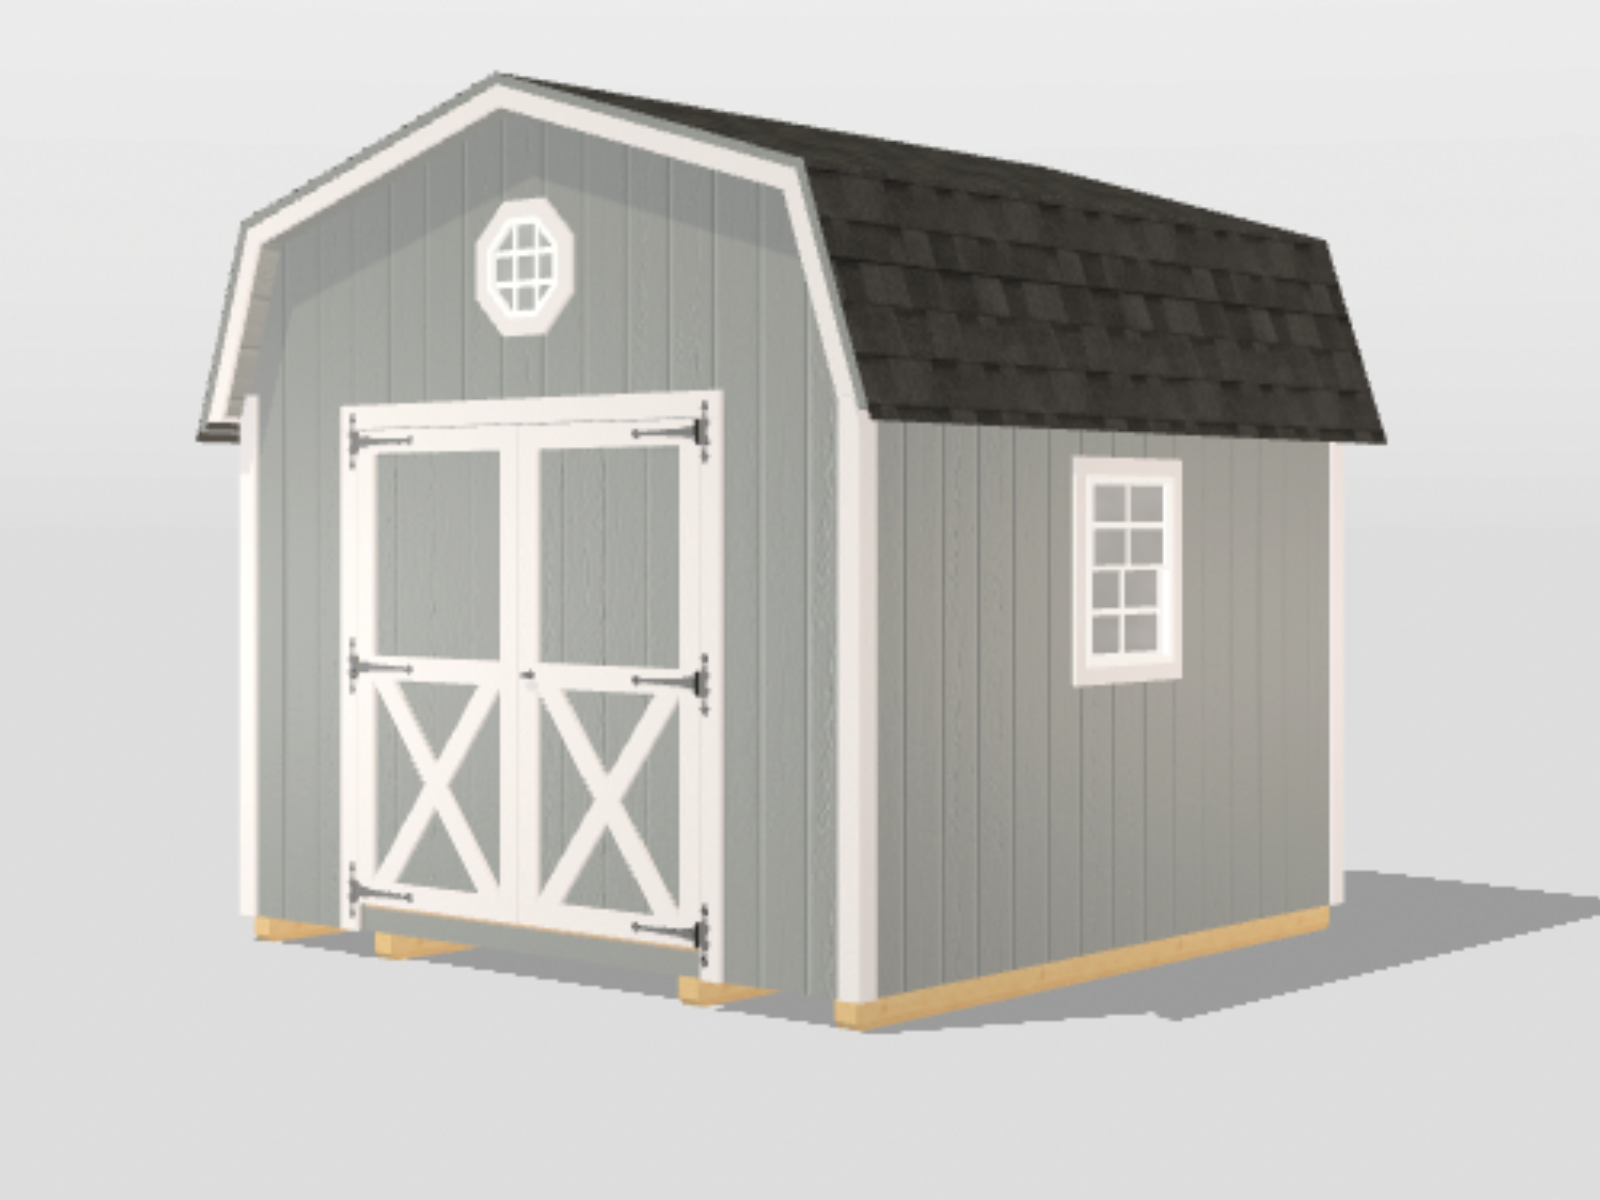 10x10 highwall shed for sale in ohio